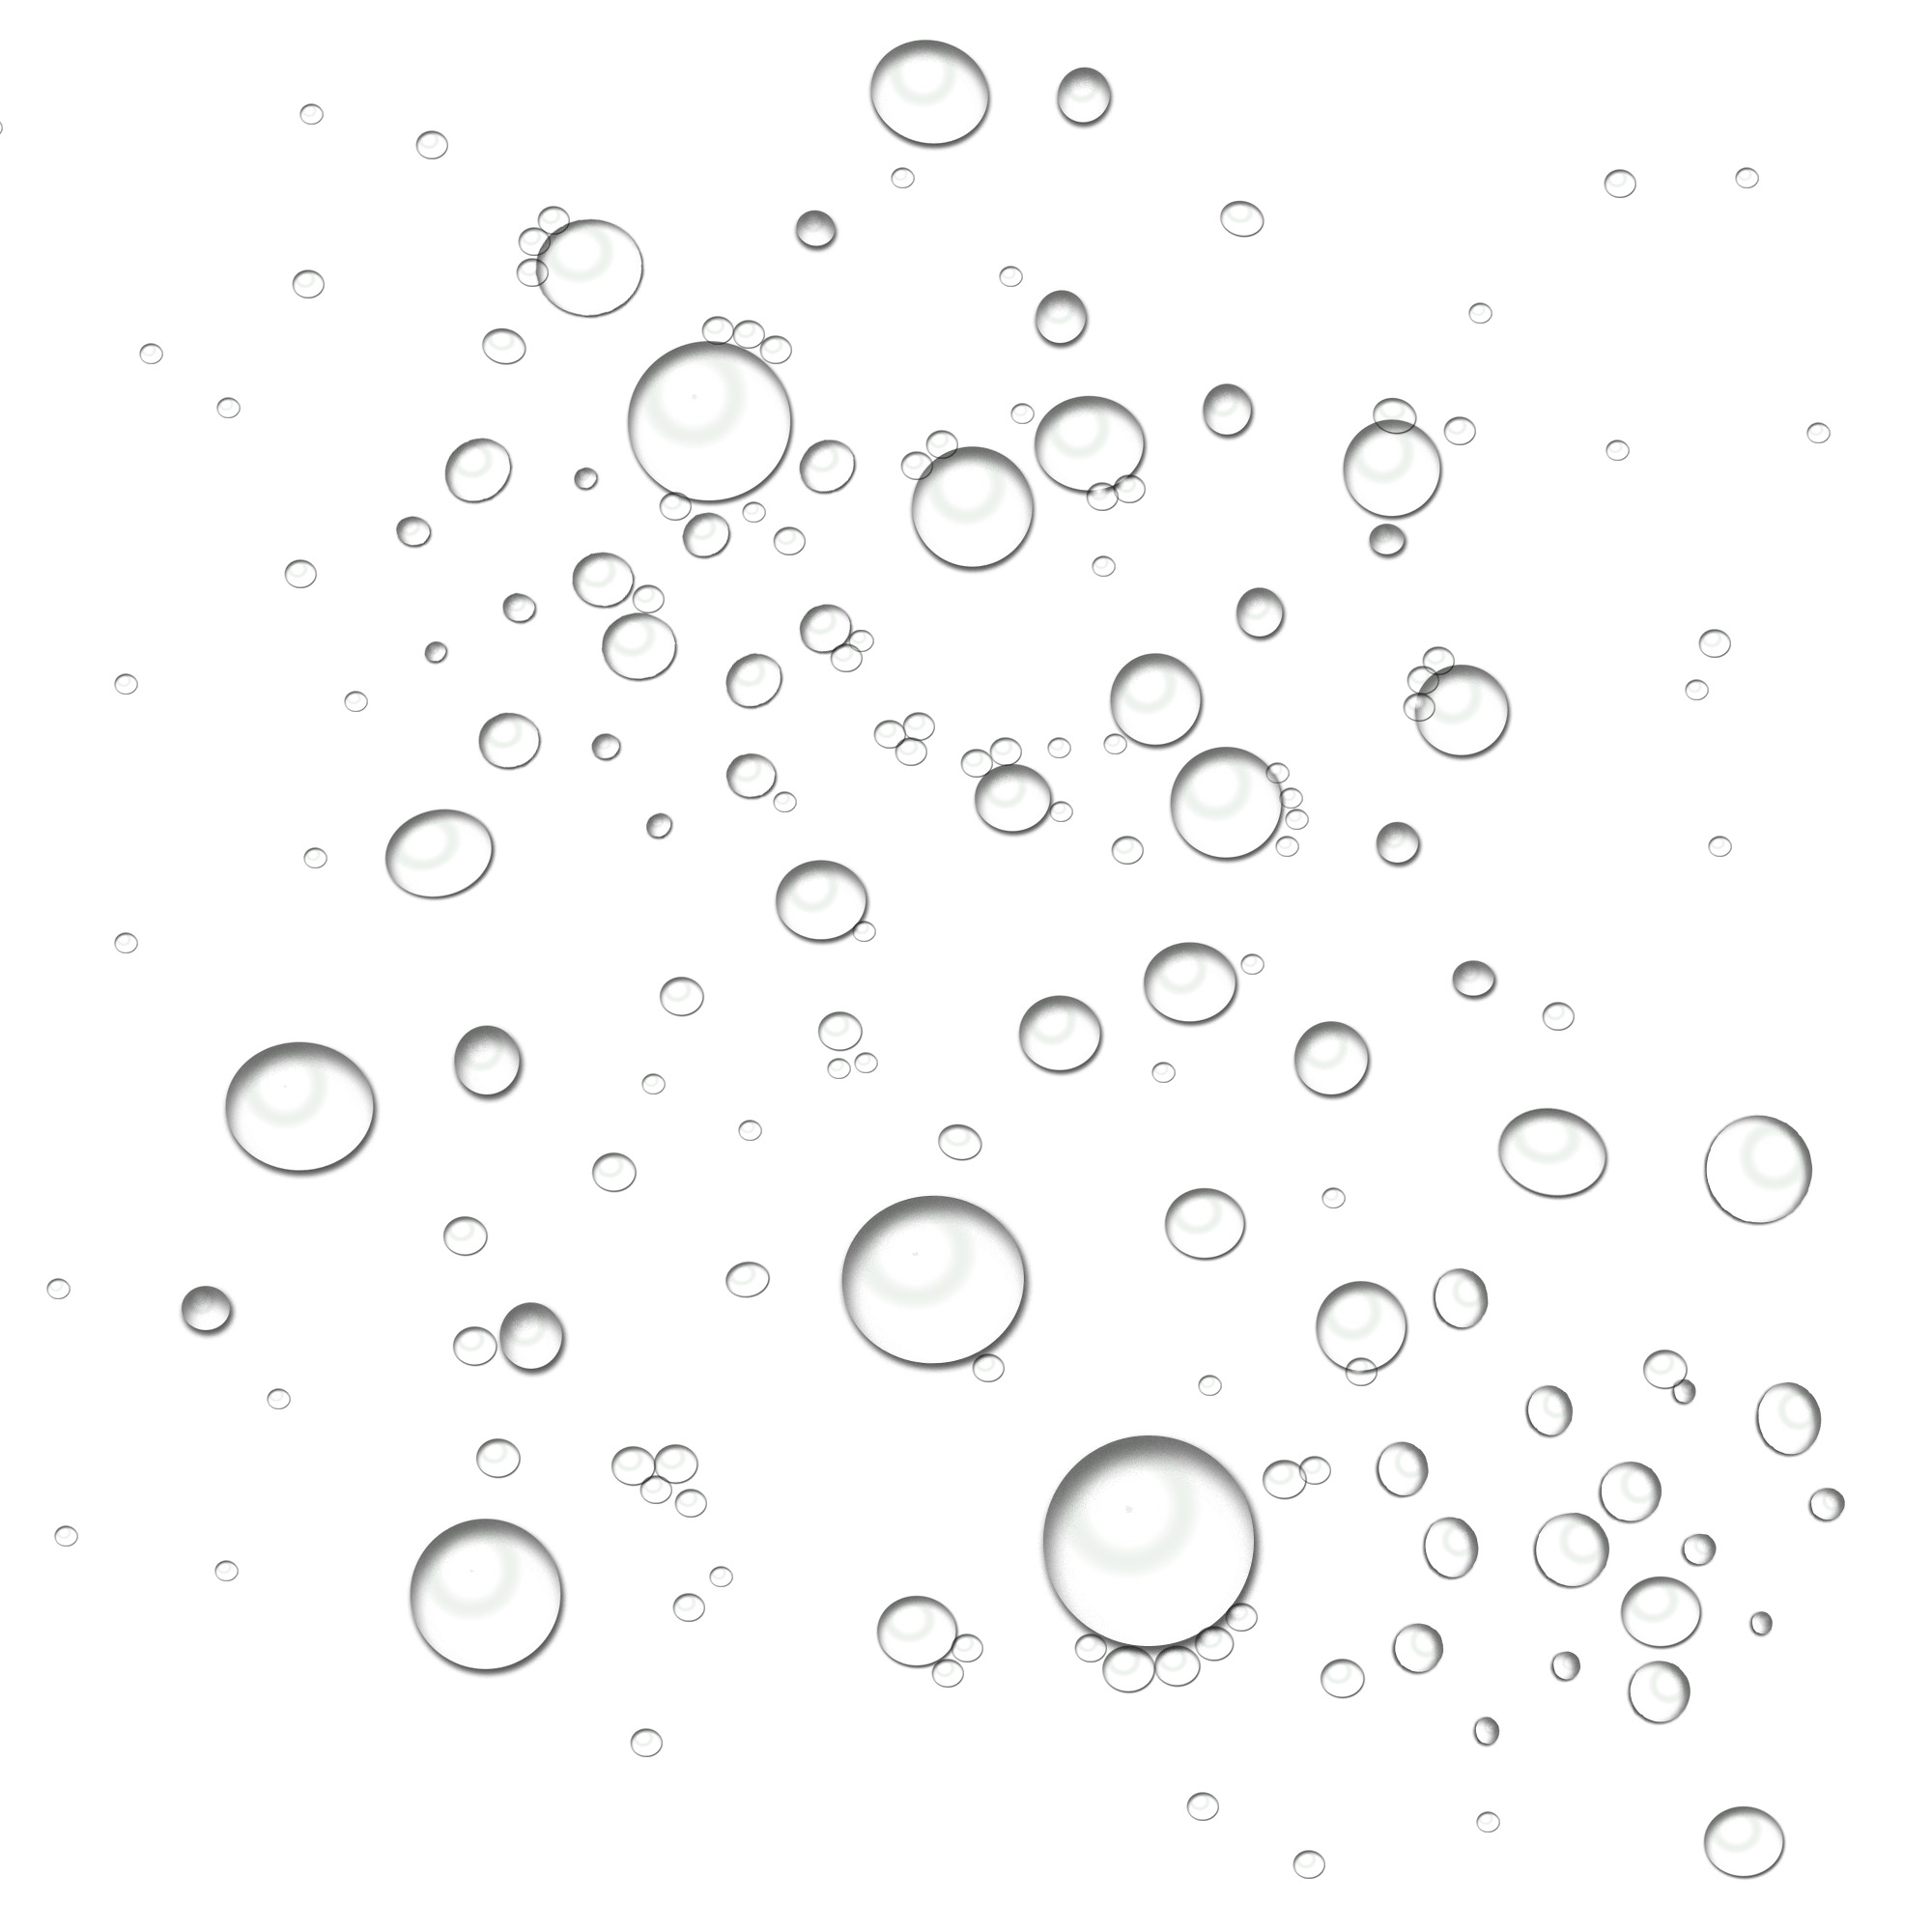 Water Drops Falling icons